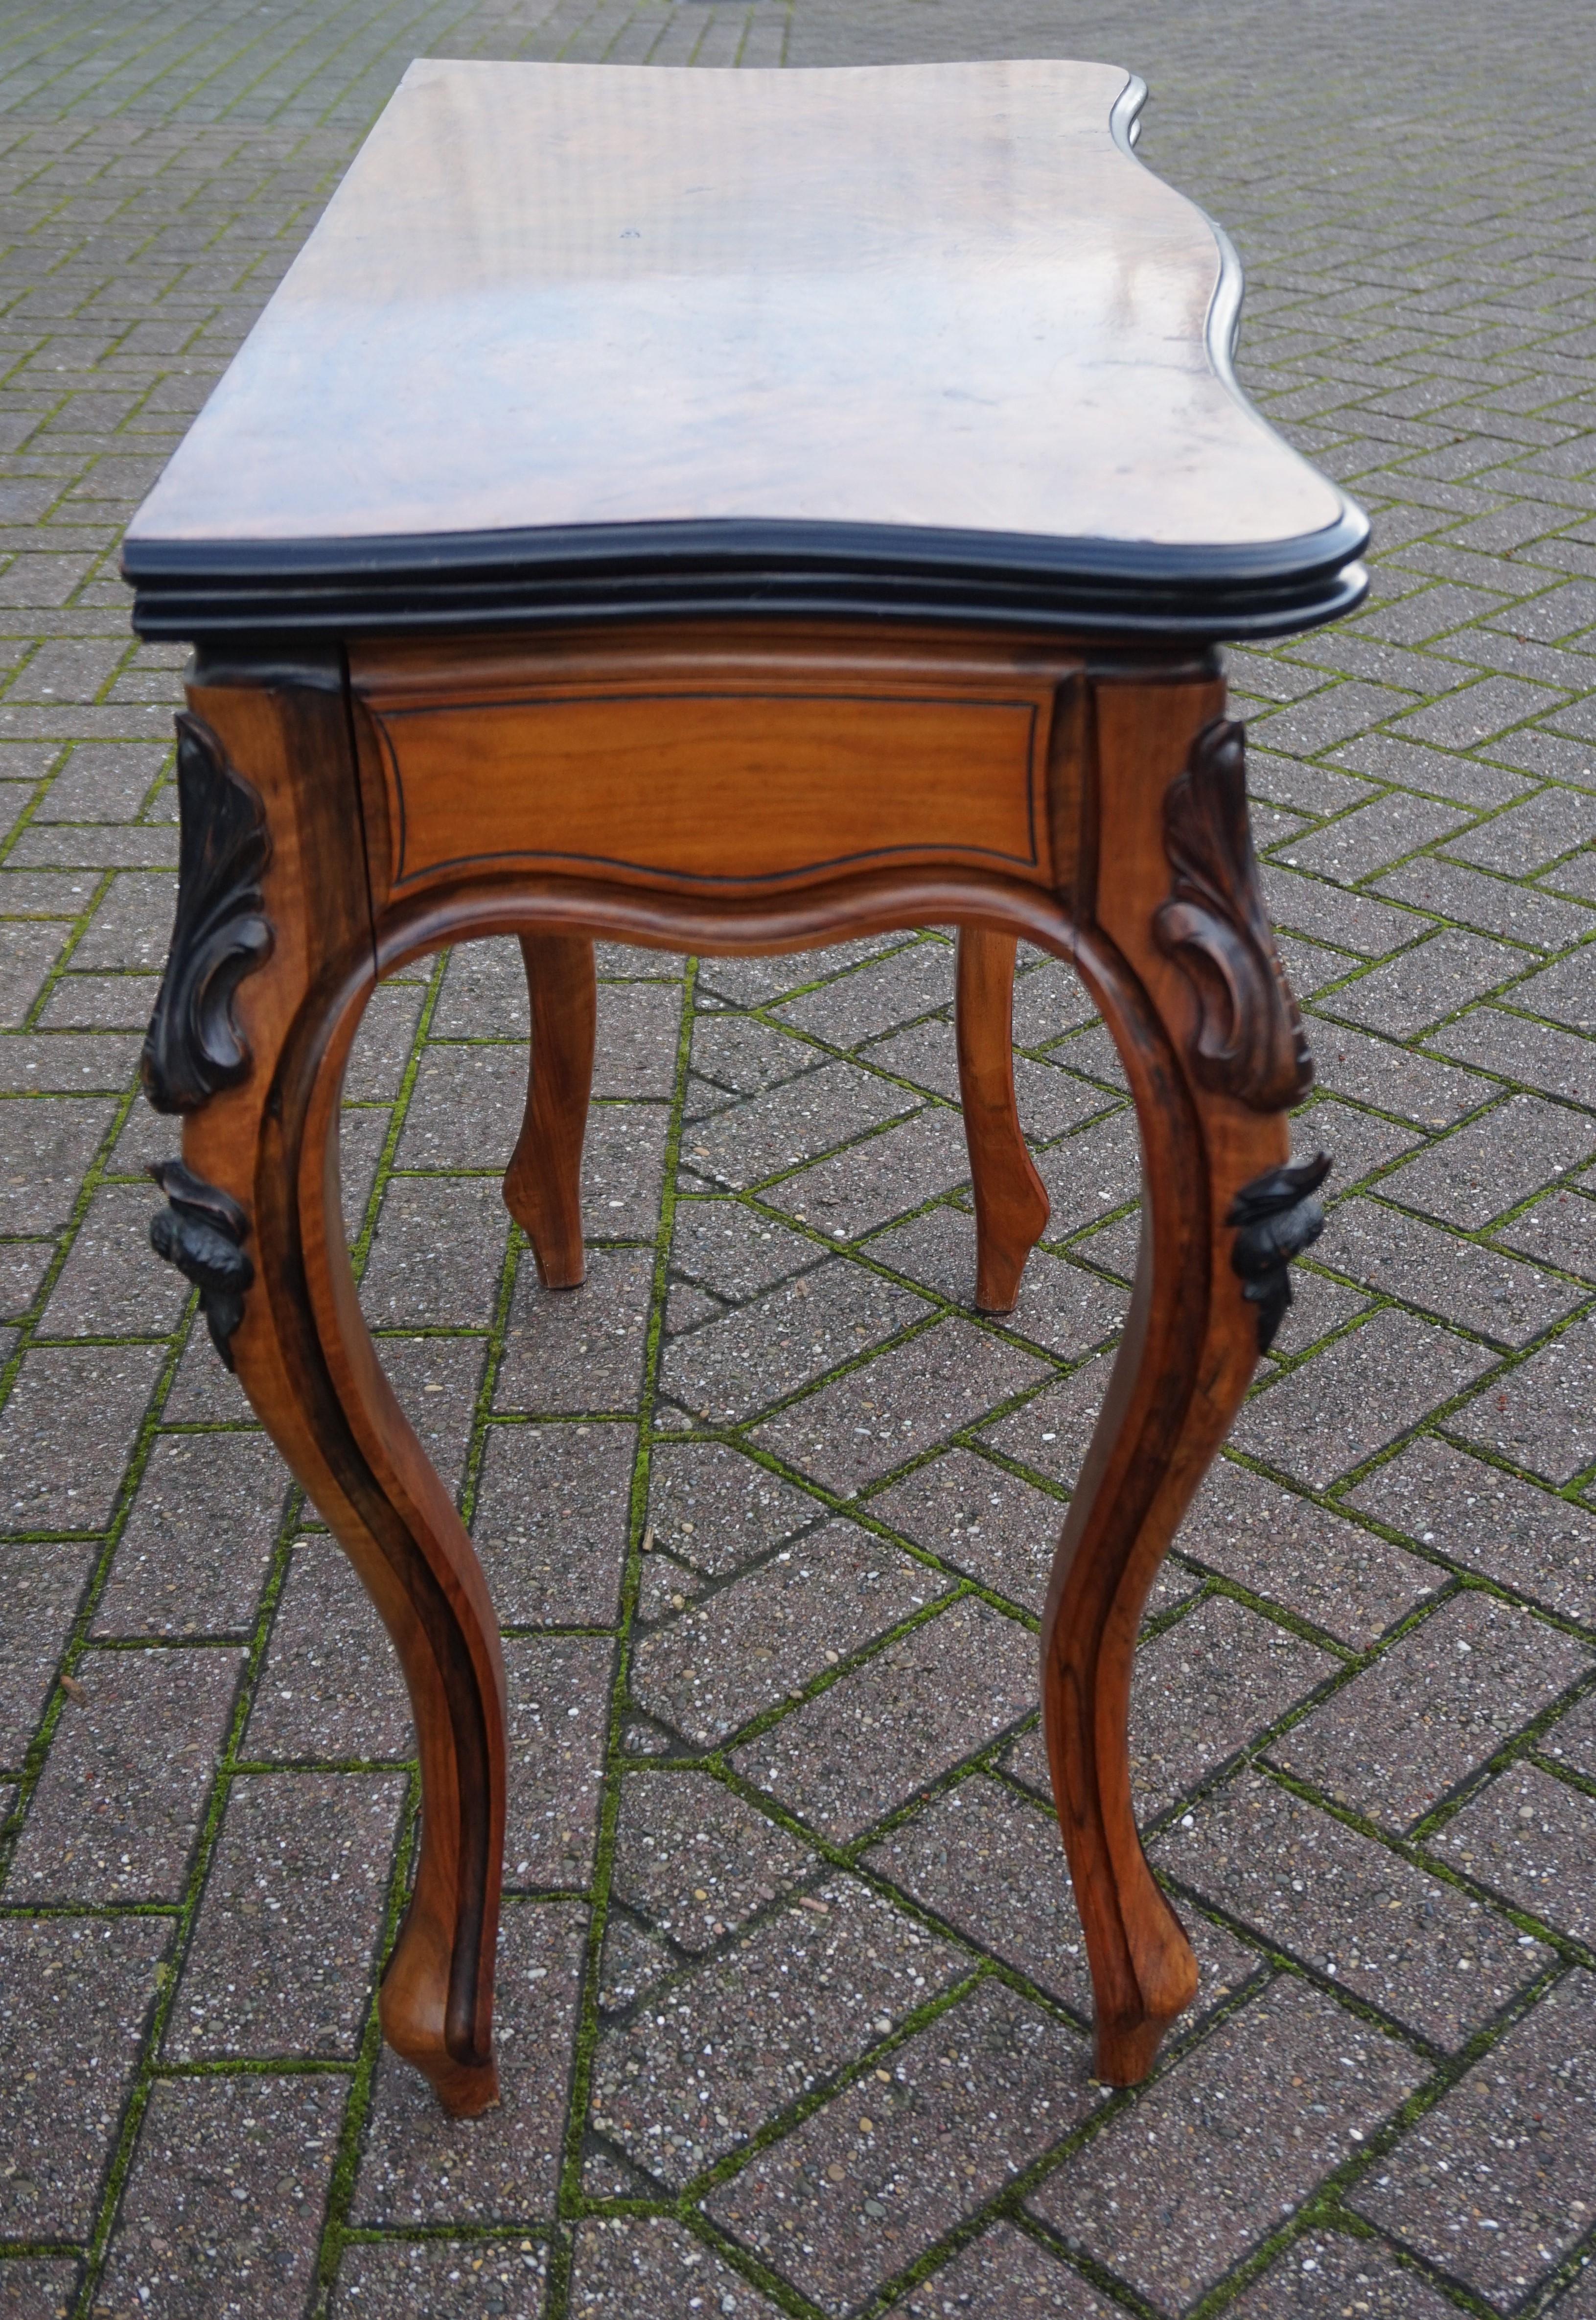 Hand-Carved Antique Late 1800s Nutwood Side Table and Games Table with a Great Patina Horrix